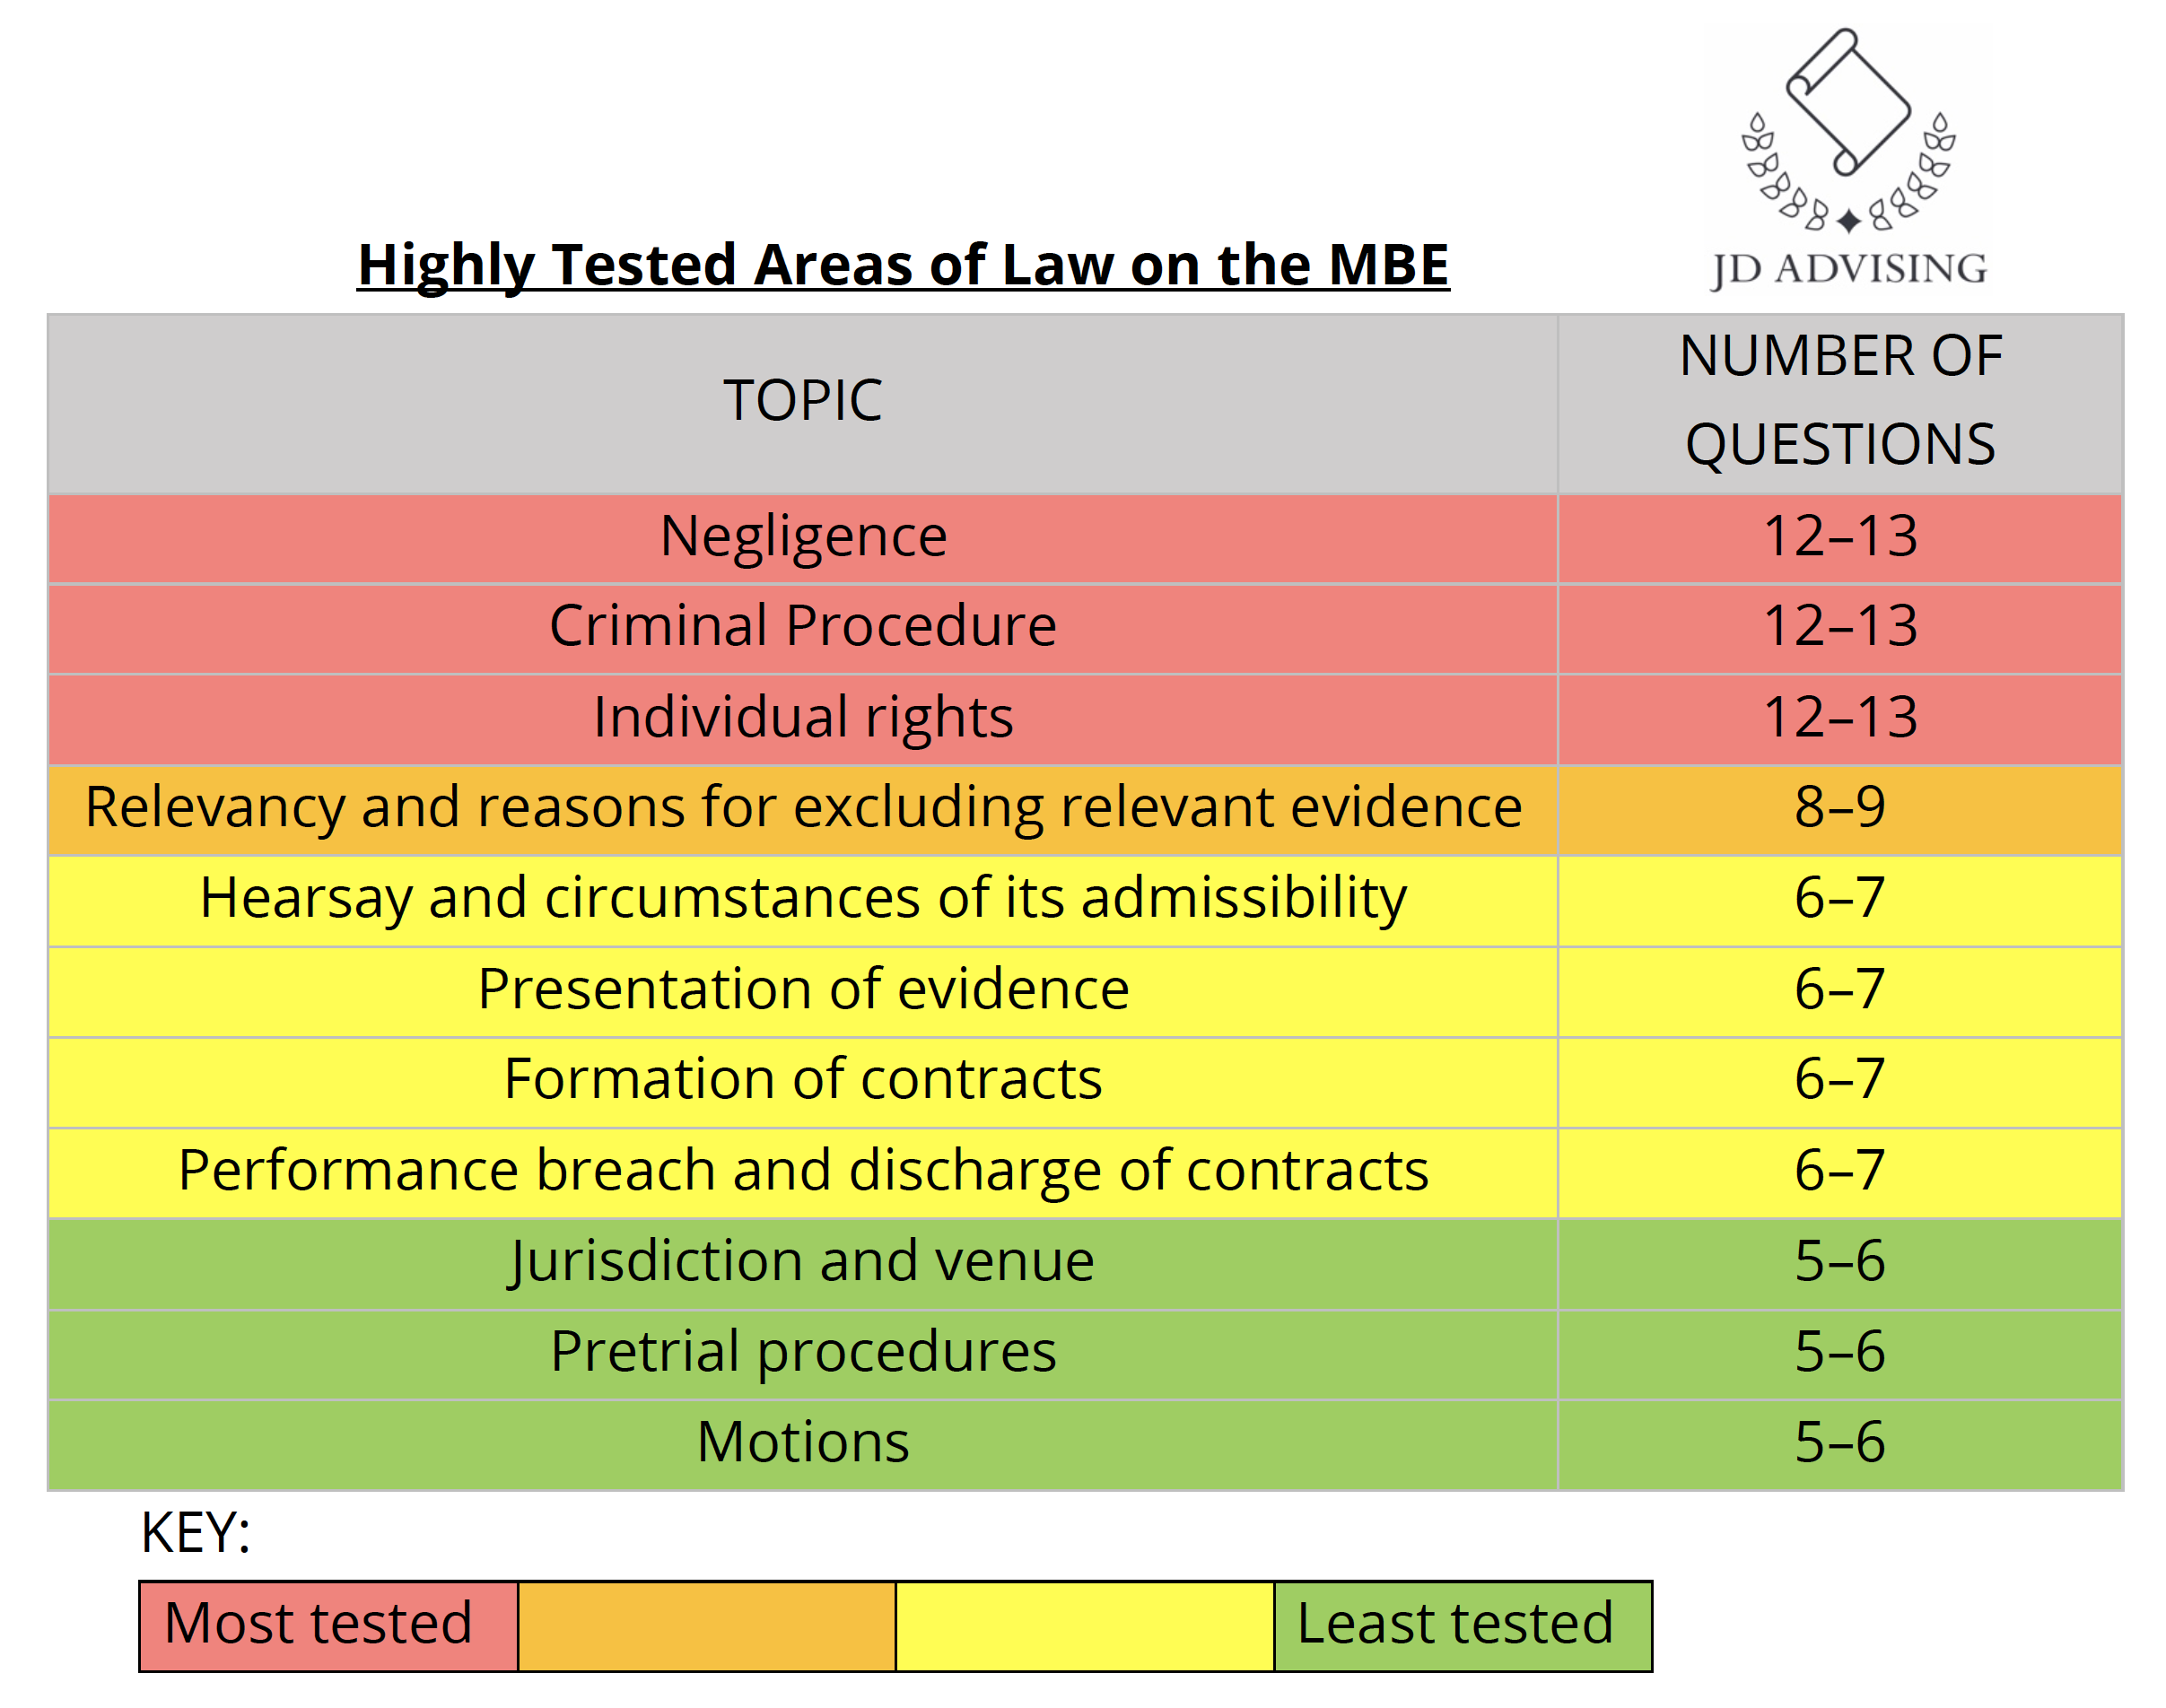 Highly Tested Areas of Law on the MBE